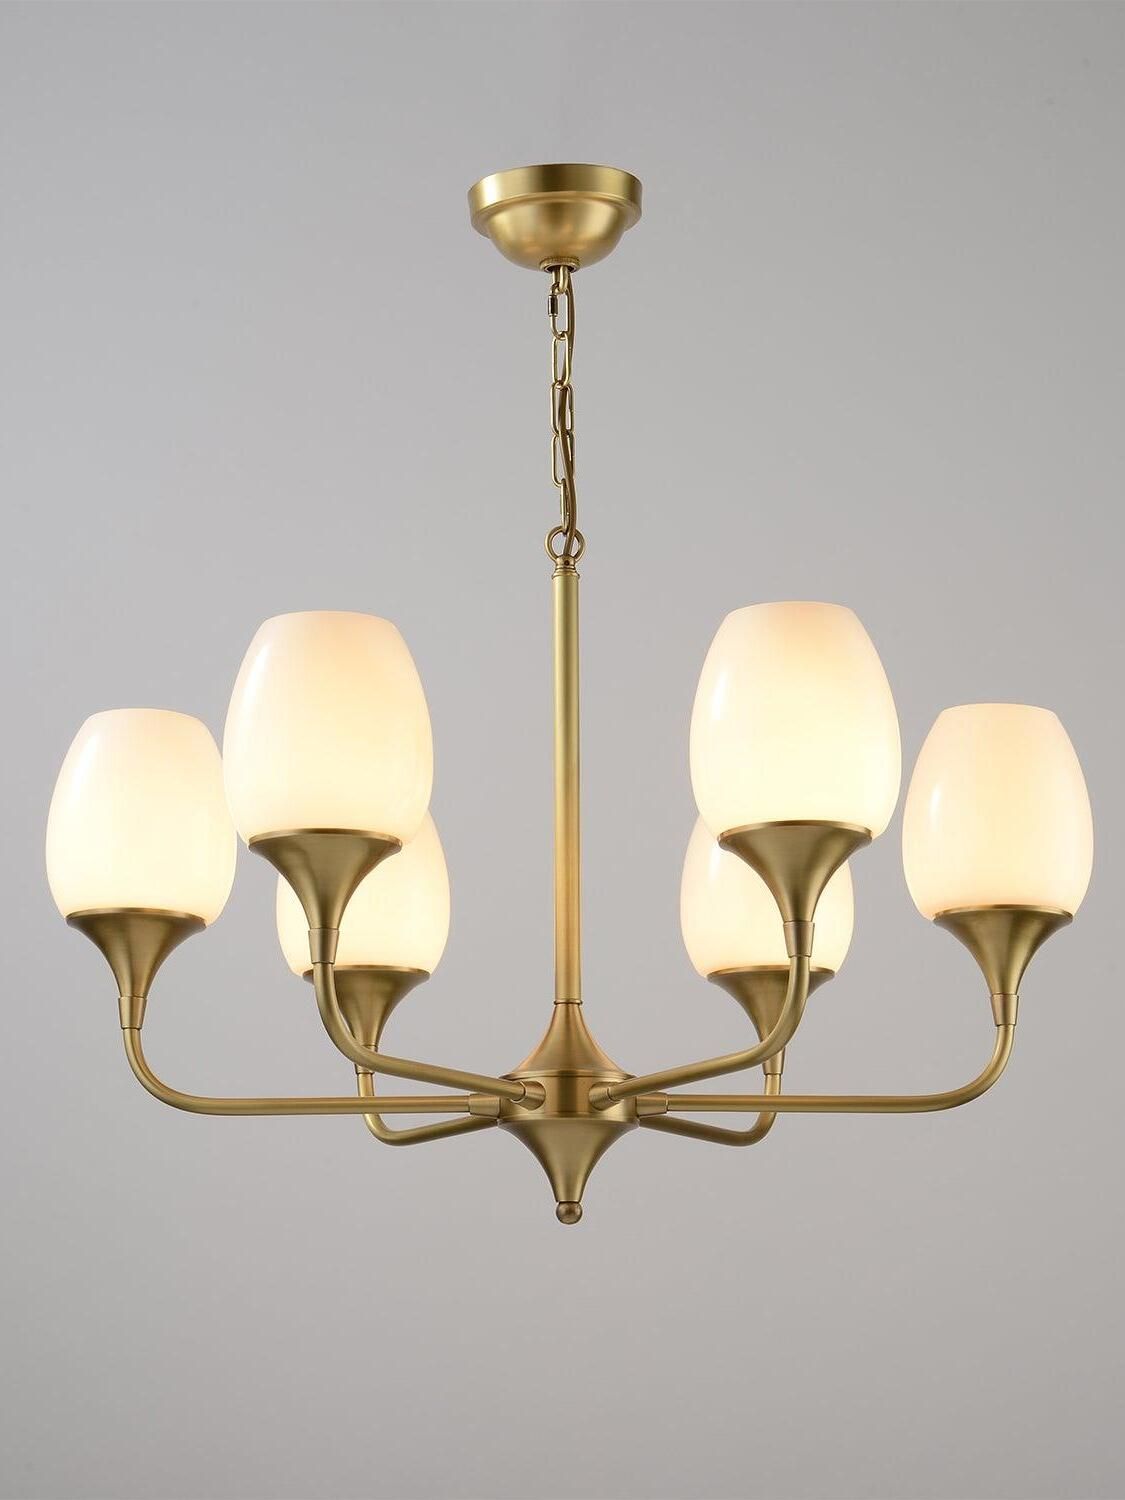 Bright Chandelier Glowing Illumination Fixture that Adds Elegance to Any Room